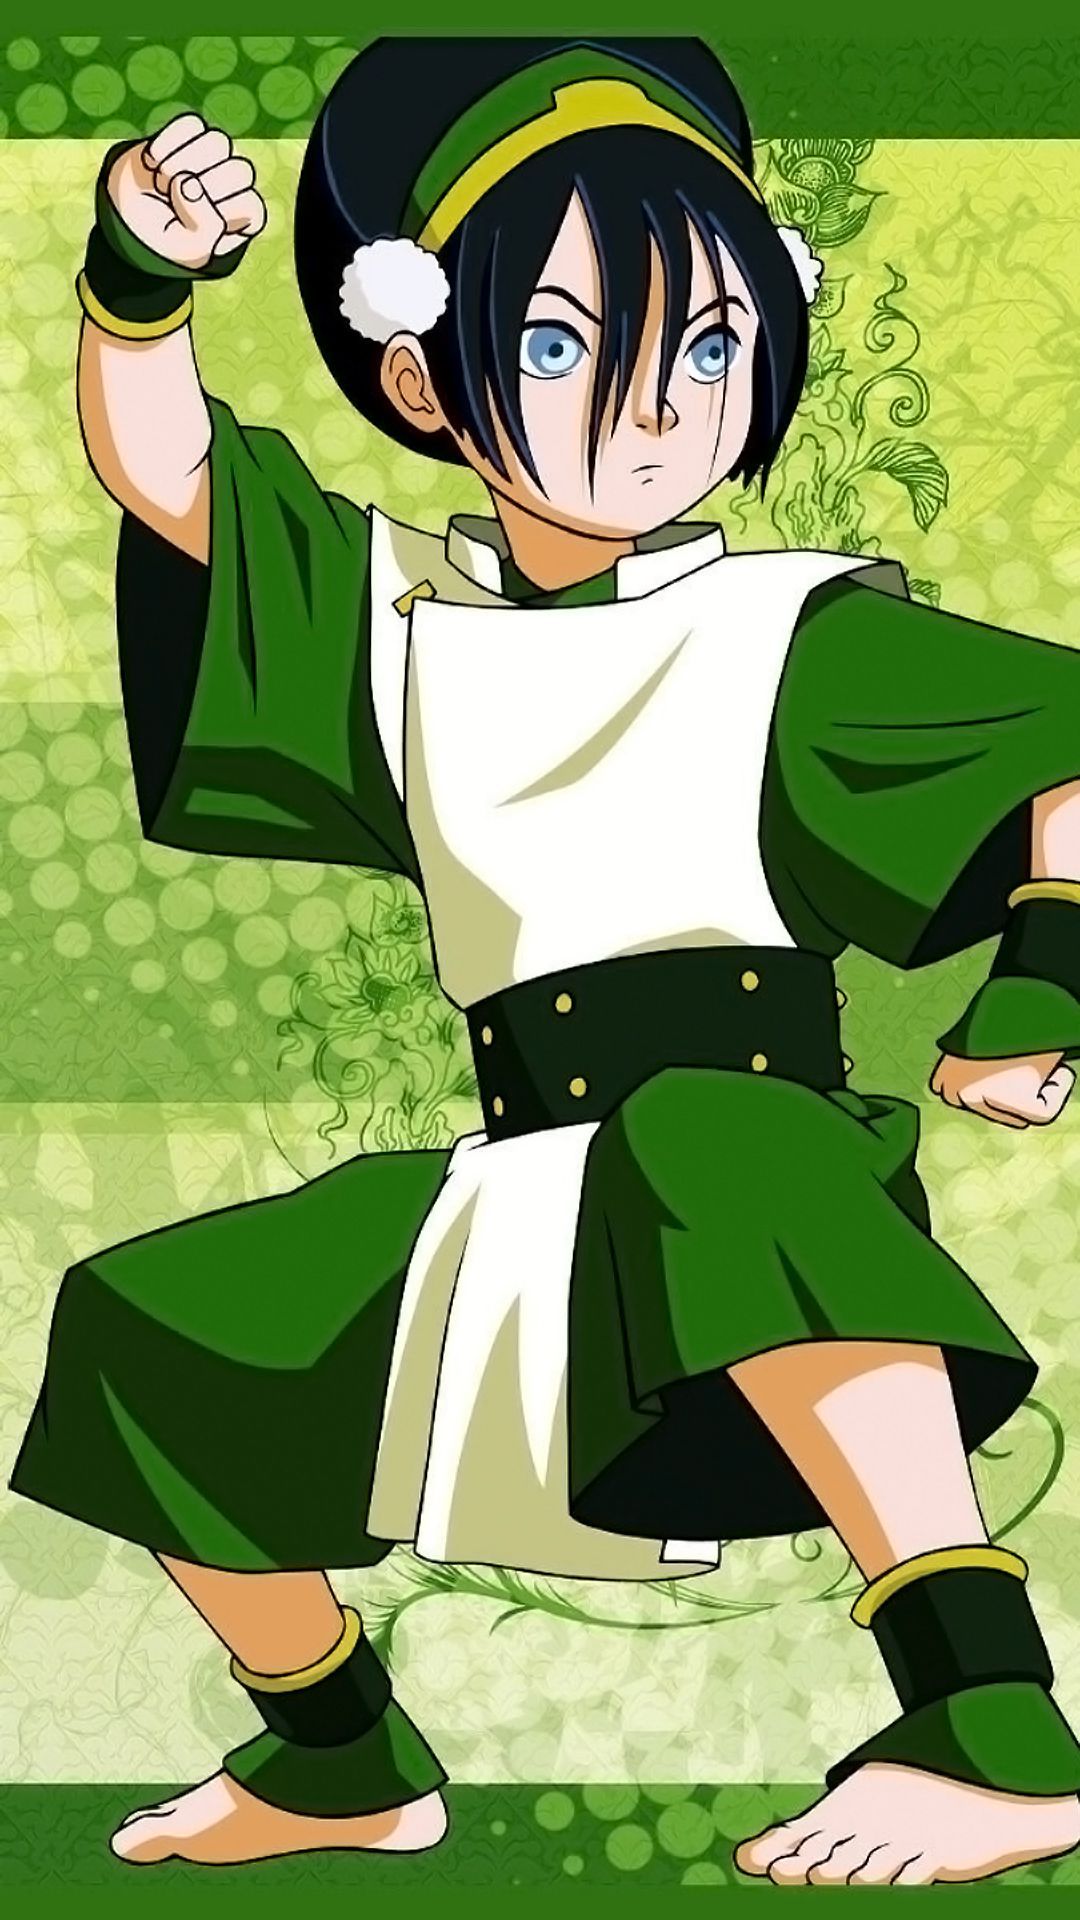 Wallpaper ID 362567  Anime Avatar The Last Airbender Phone Wallpaper  Toph Beifong 1080x2340 free download